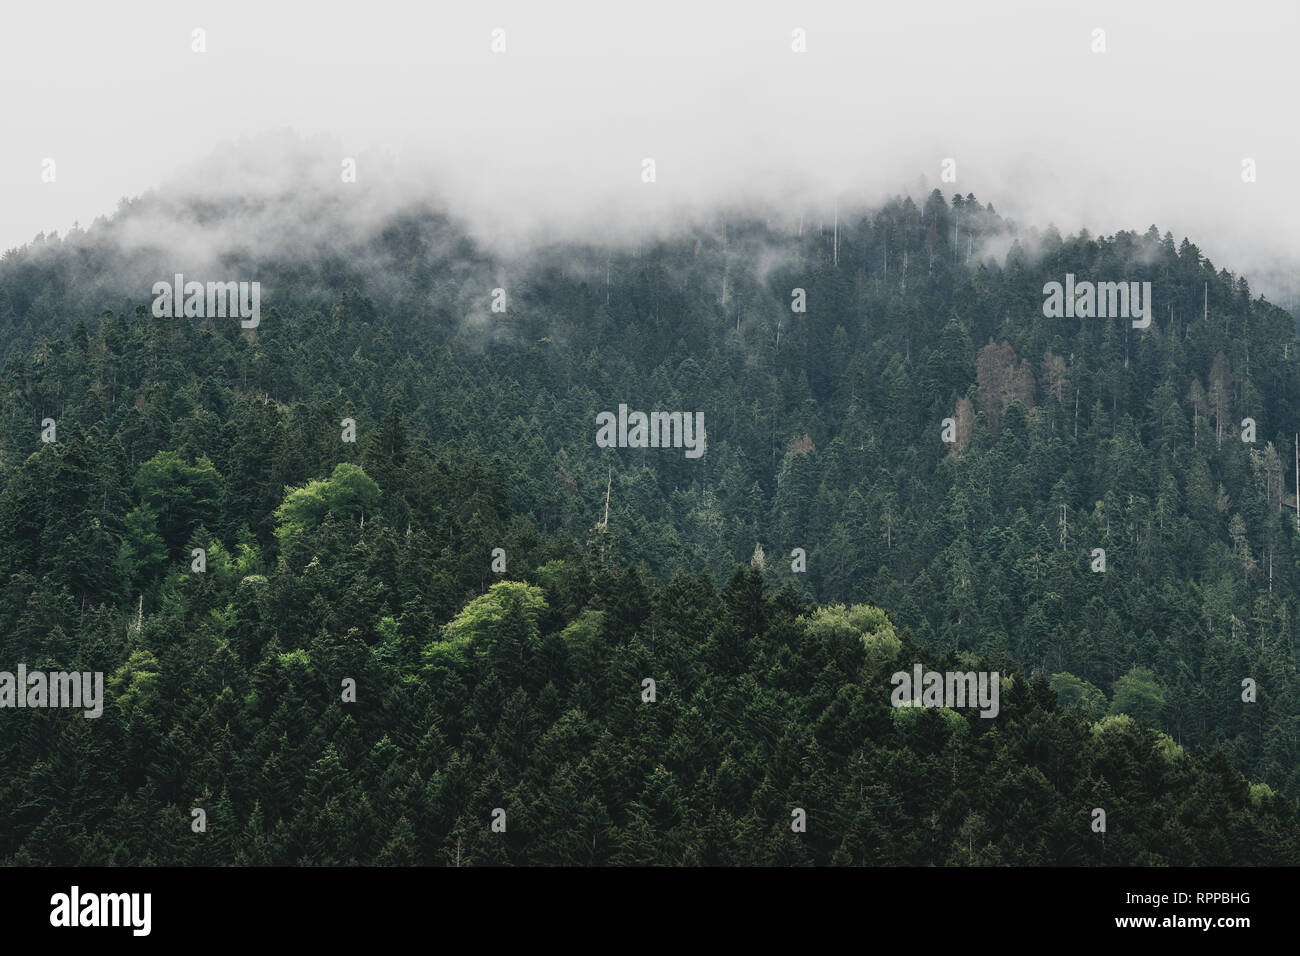 Moody dark forest landscape with cloud and mist Stock Photo